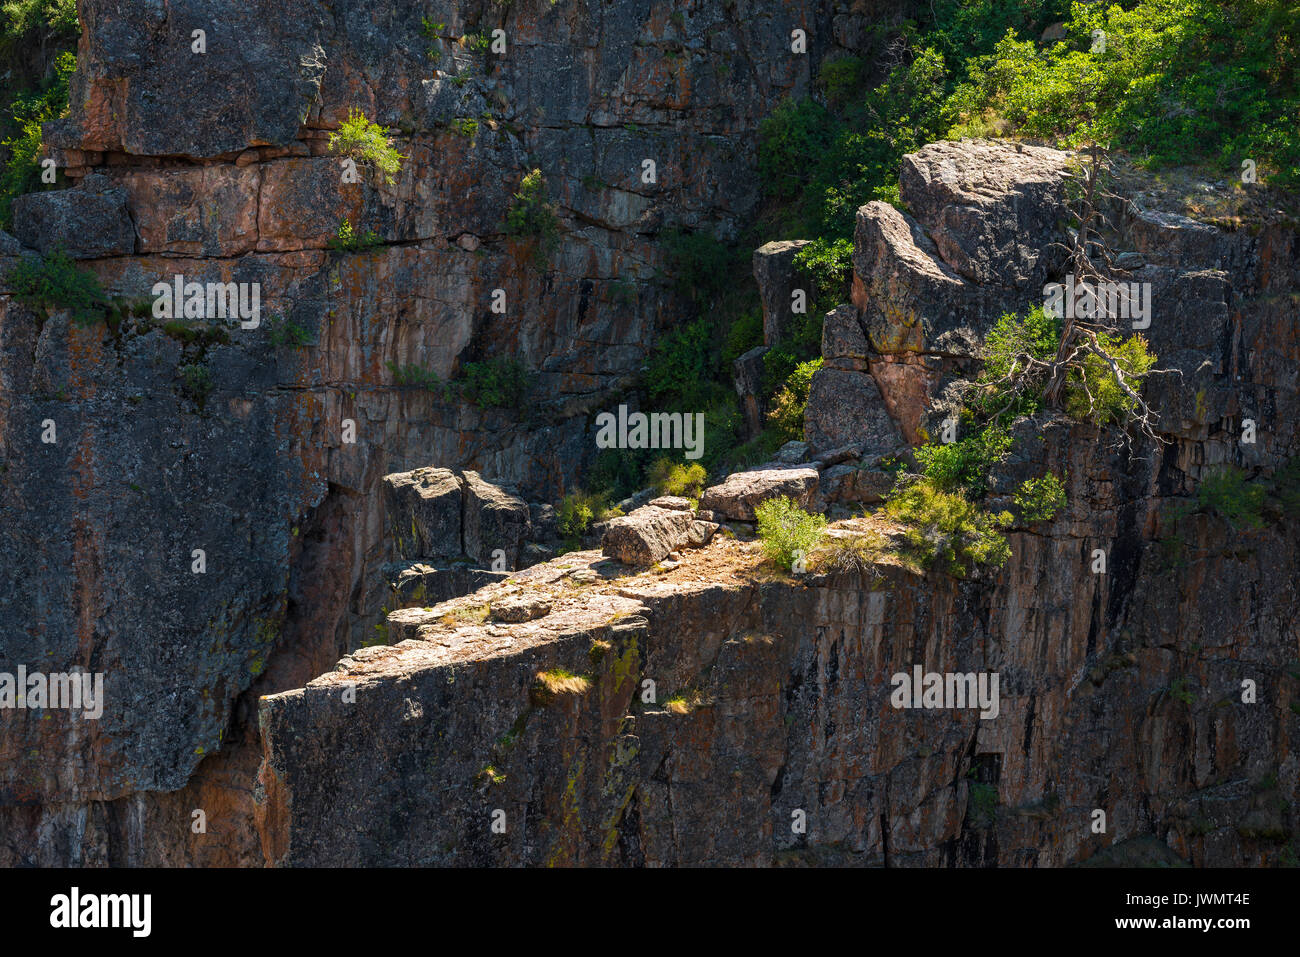 Sunshine inside the steep cliffs of the Black Canyon of the Gunnison in the state of Colorado, United States of America (USA). Stock Photo